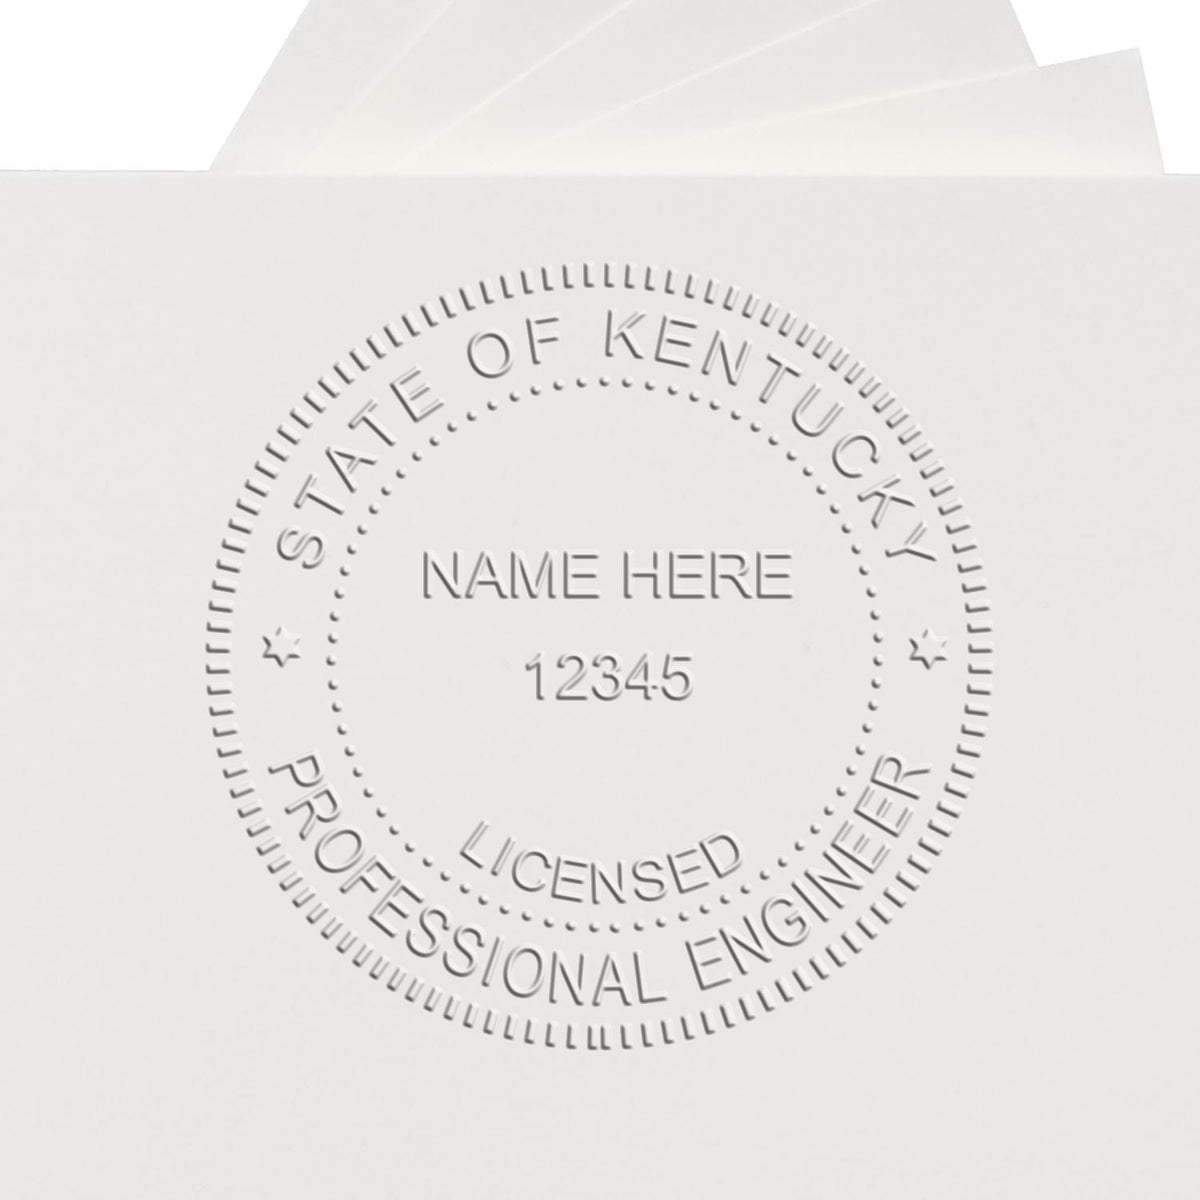 The State of Kentucky Extended Long Reach Engineer Seal stamp impression comes to life with a crisp, detailed photo on paper - showcasing true professional quality.